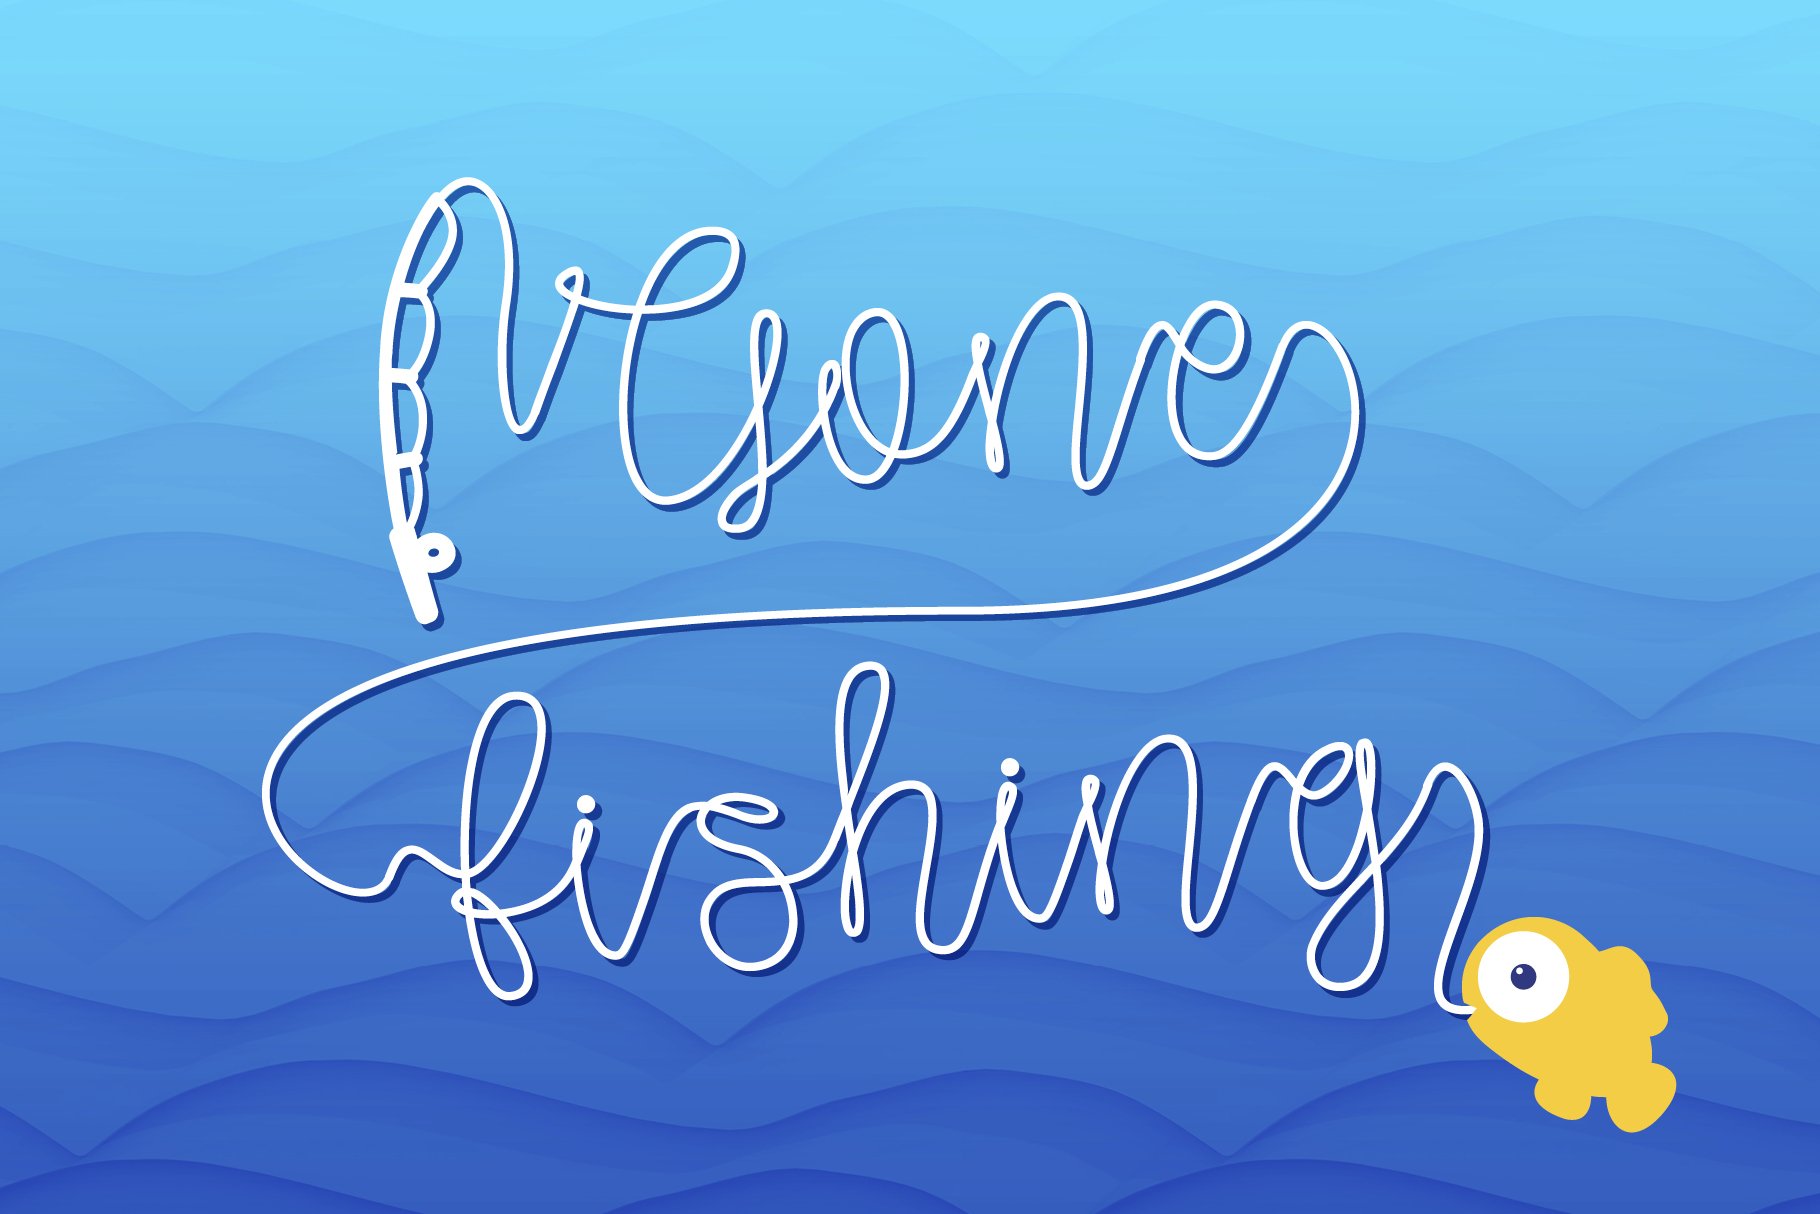 Gone Fishing - a fishing font!!! cover image.